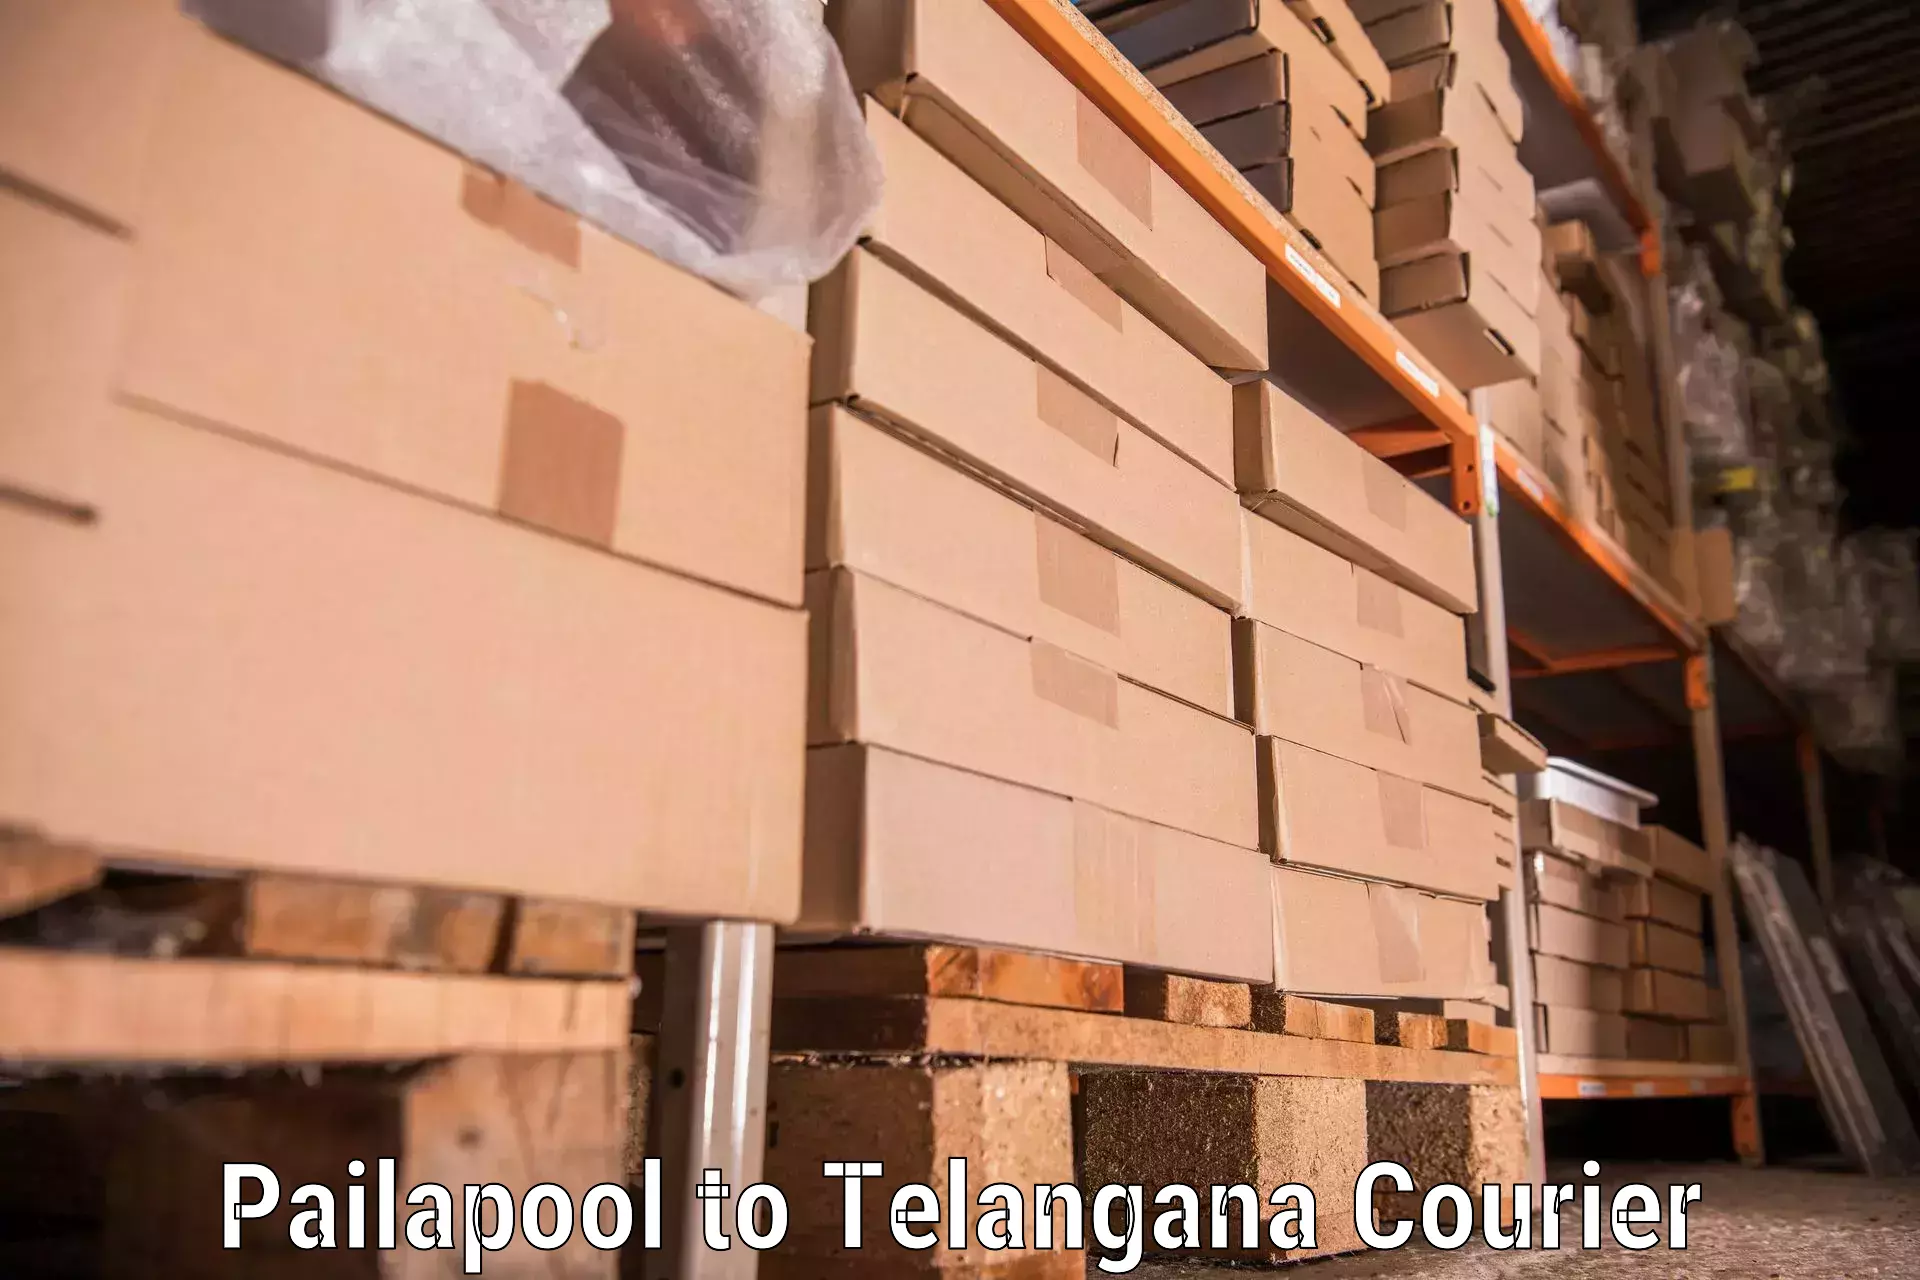 Furniture moving assistance in Pailapool to Gangadhara